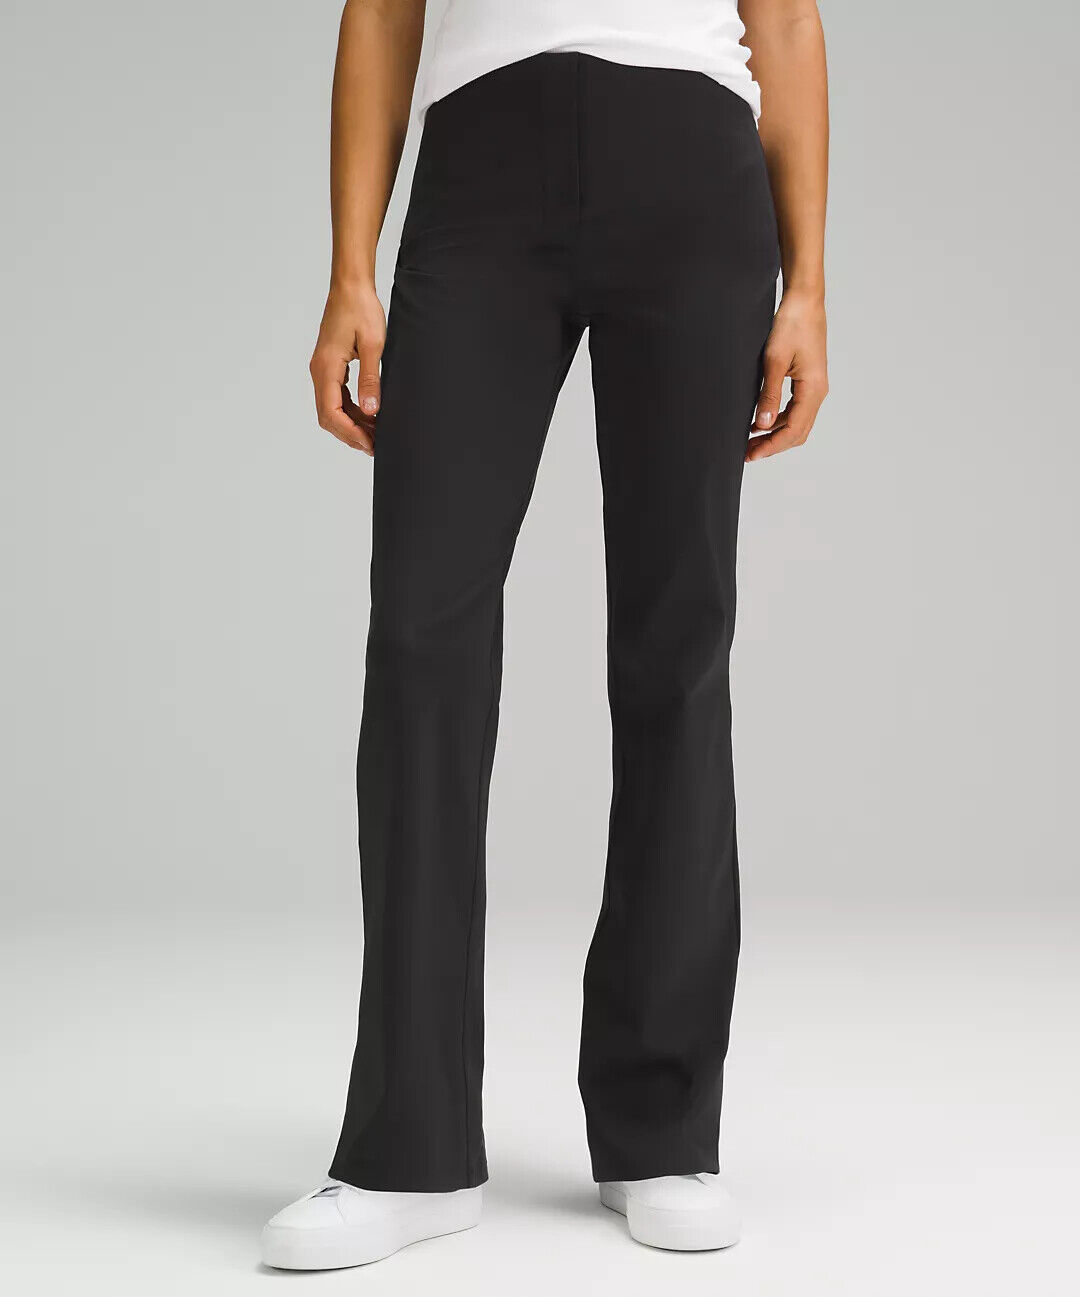 Lululemon women pants: Elevating Your Workout Wardrobe with it插图4